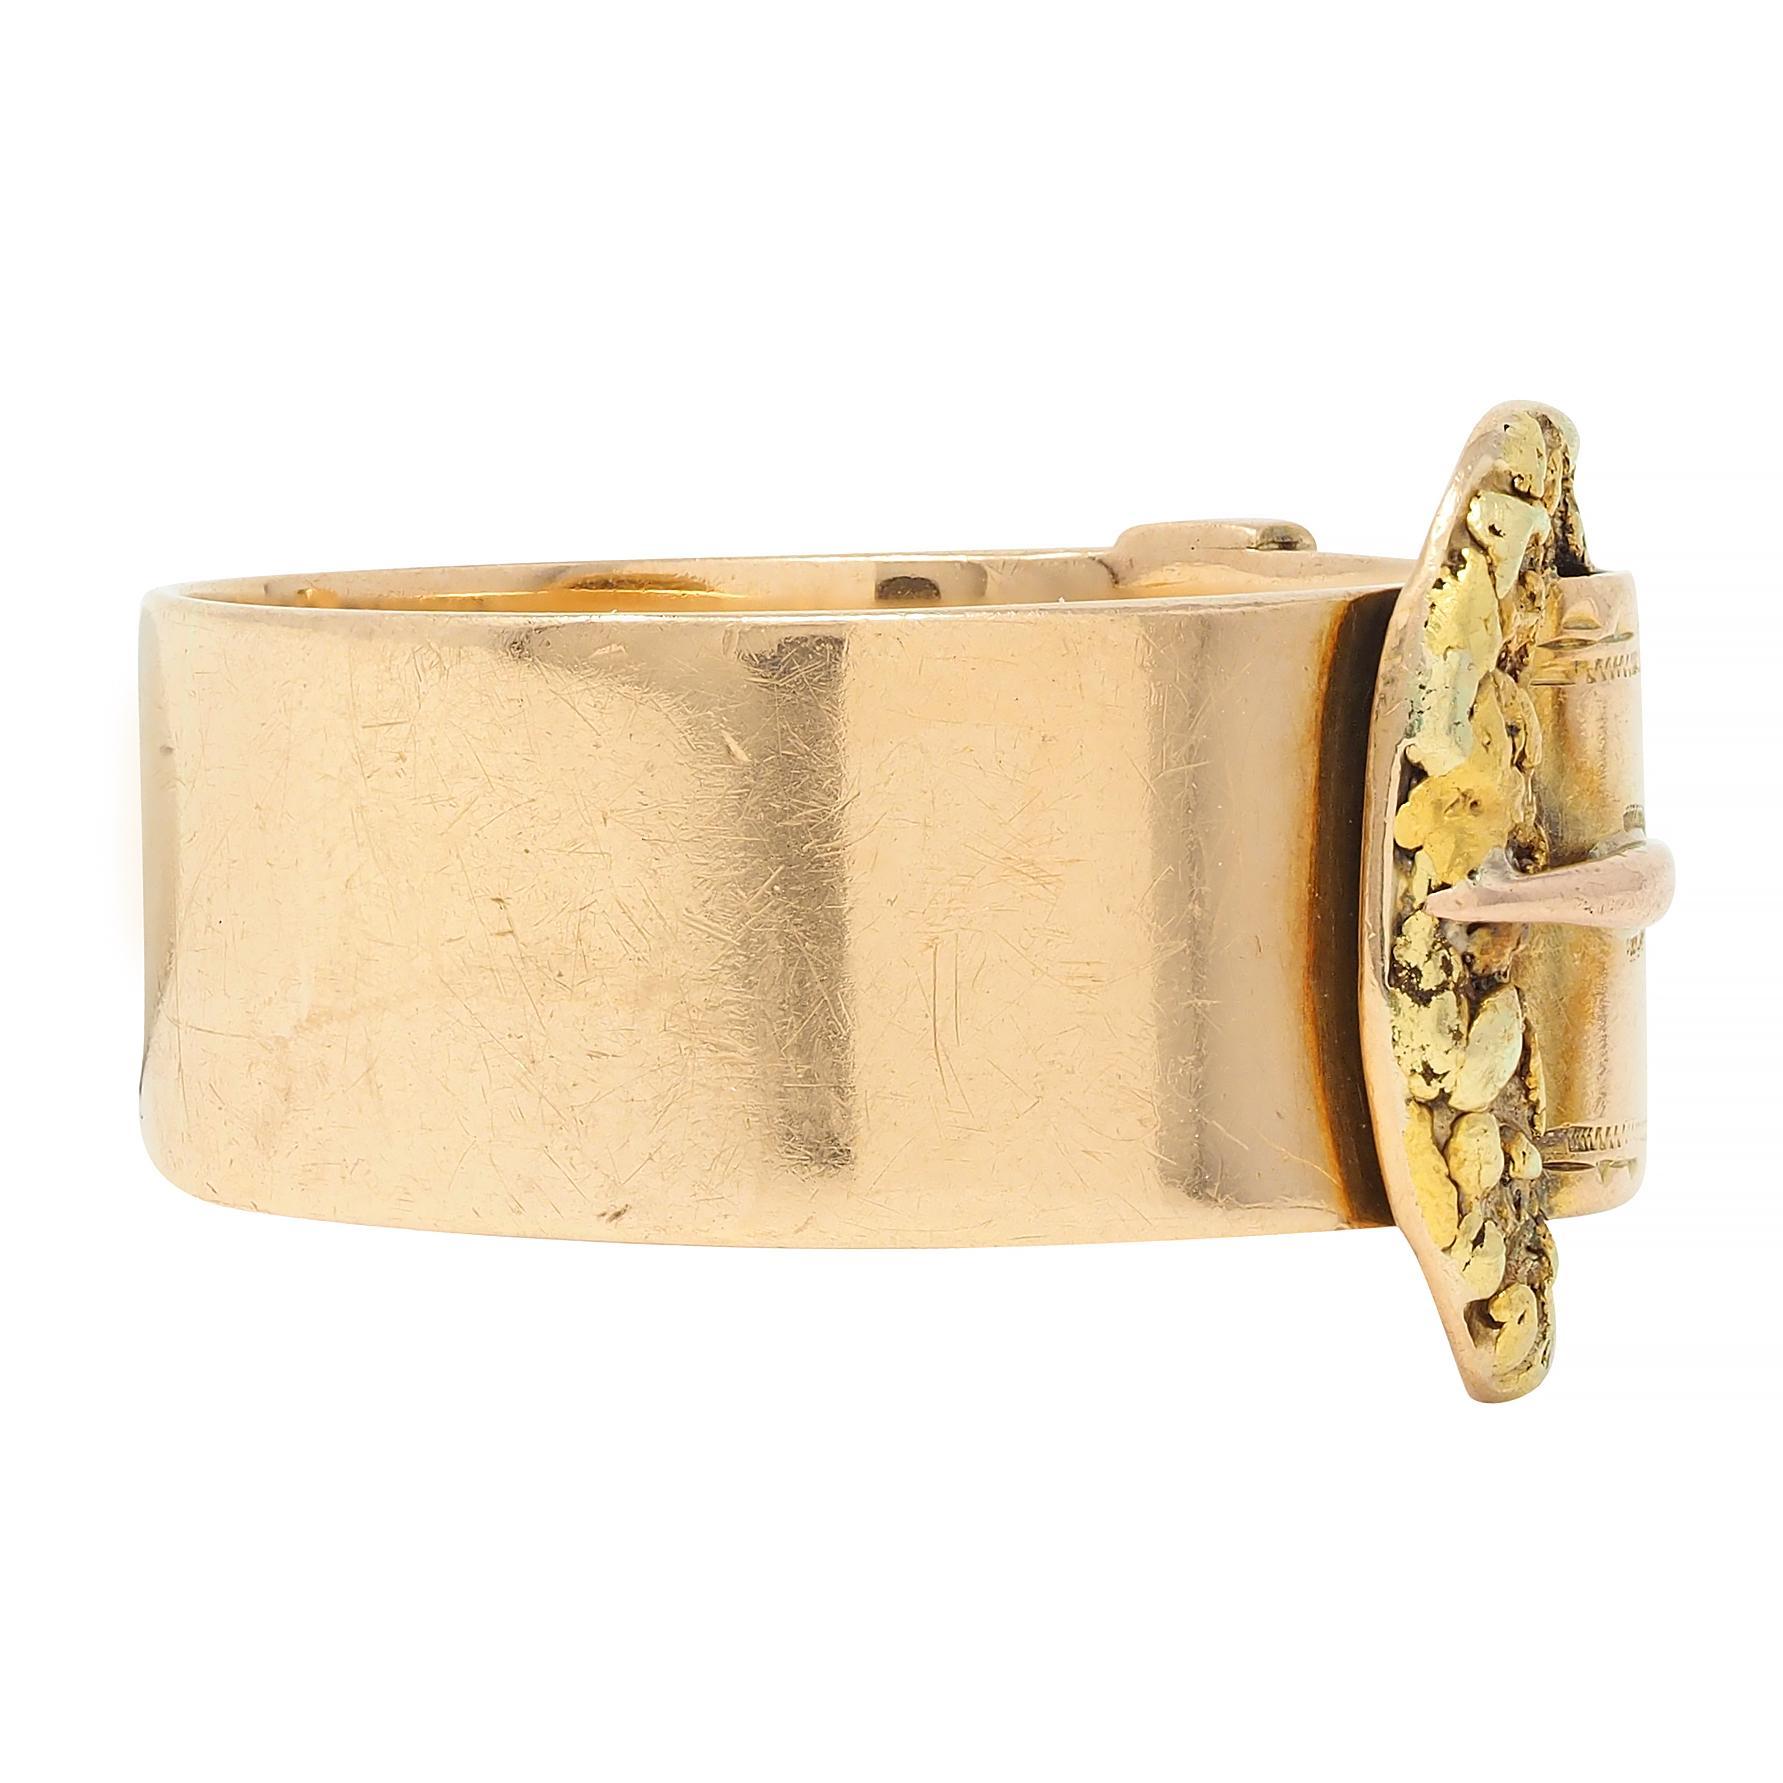 Designed as a wide rose gold band featuring a dimensional buckle motif
Buckle and strap are yellow gold with gold nugget-style texture
Accented by engraved stitch and loop motif detailing 
Stamped for 14 karat gold
With maker's mark for Jos. Mayers